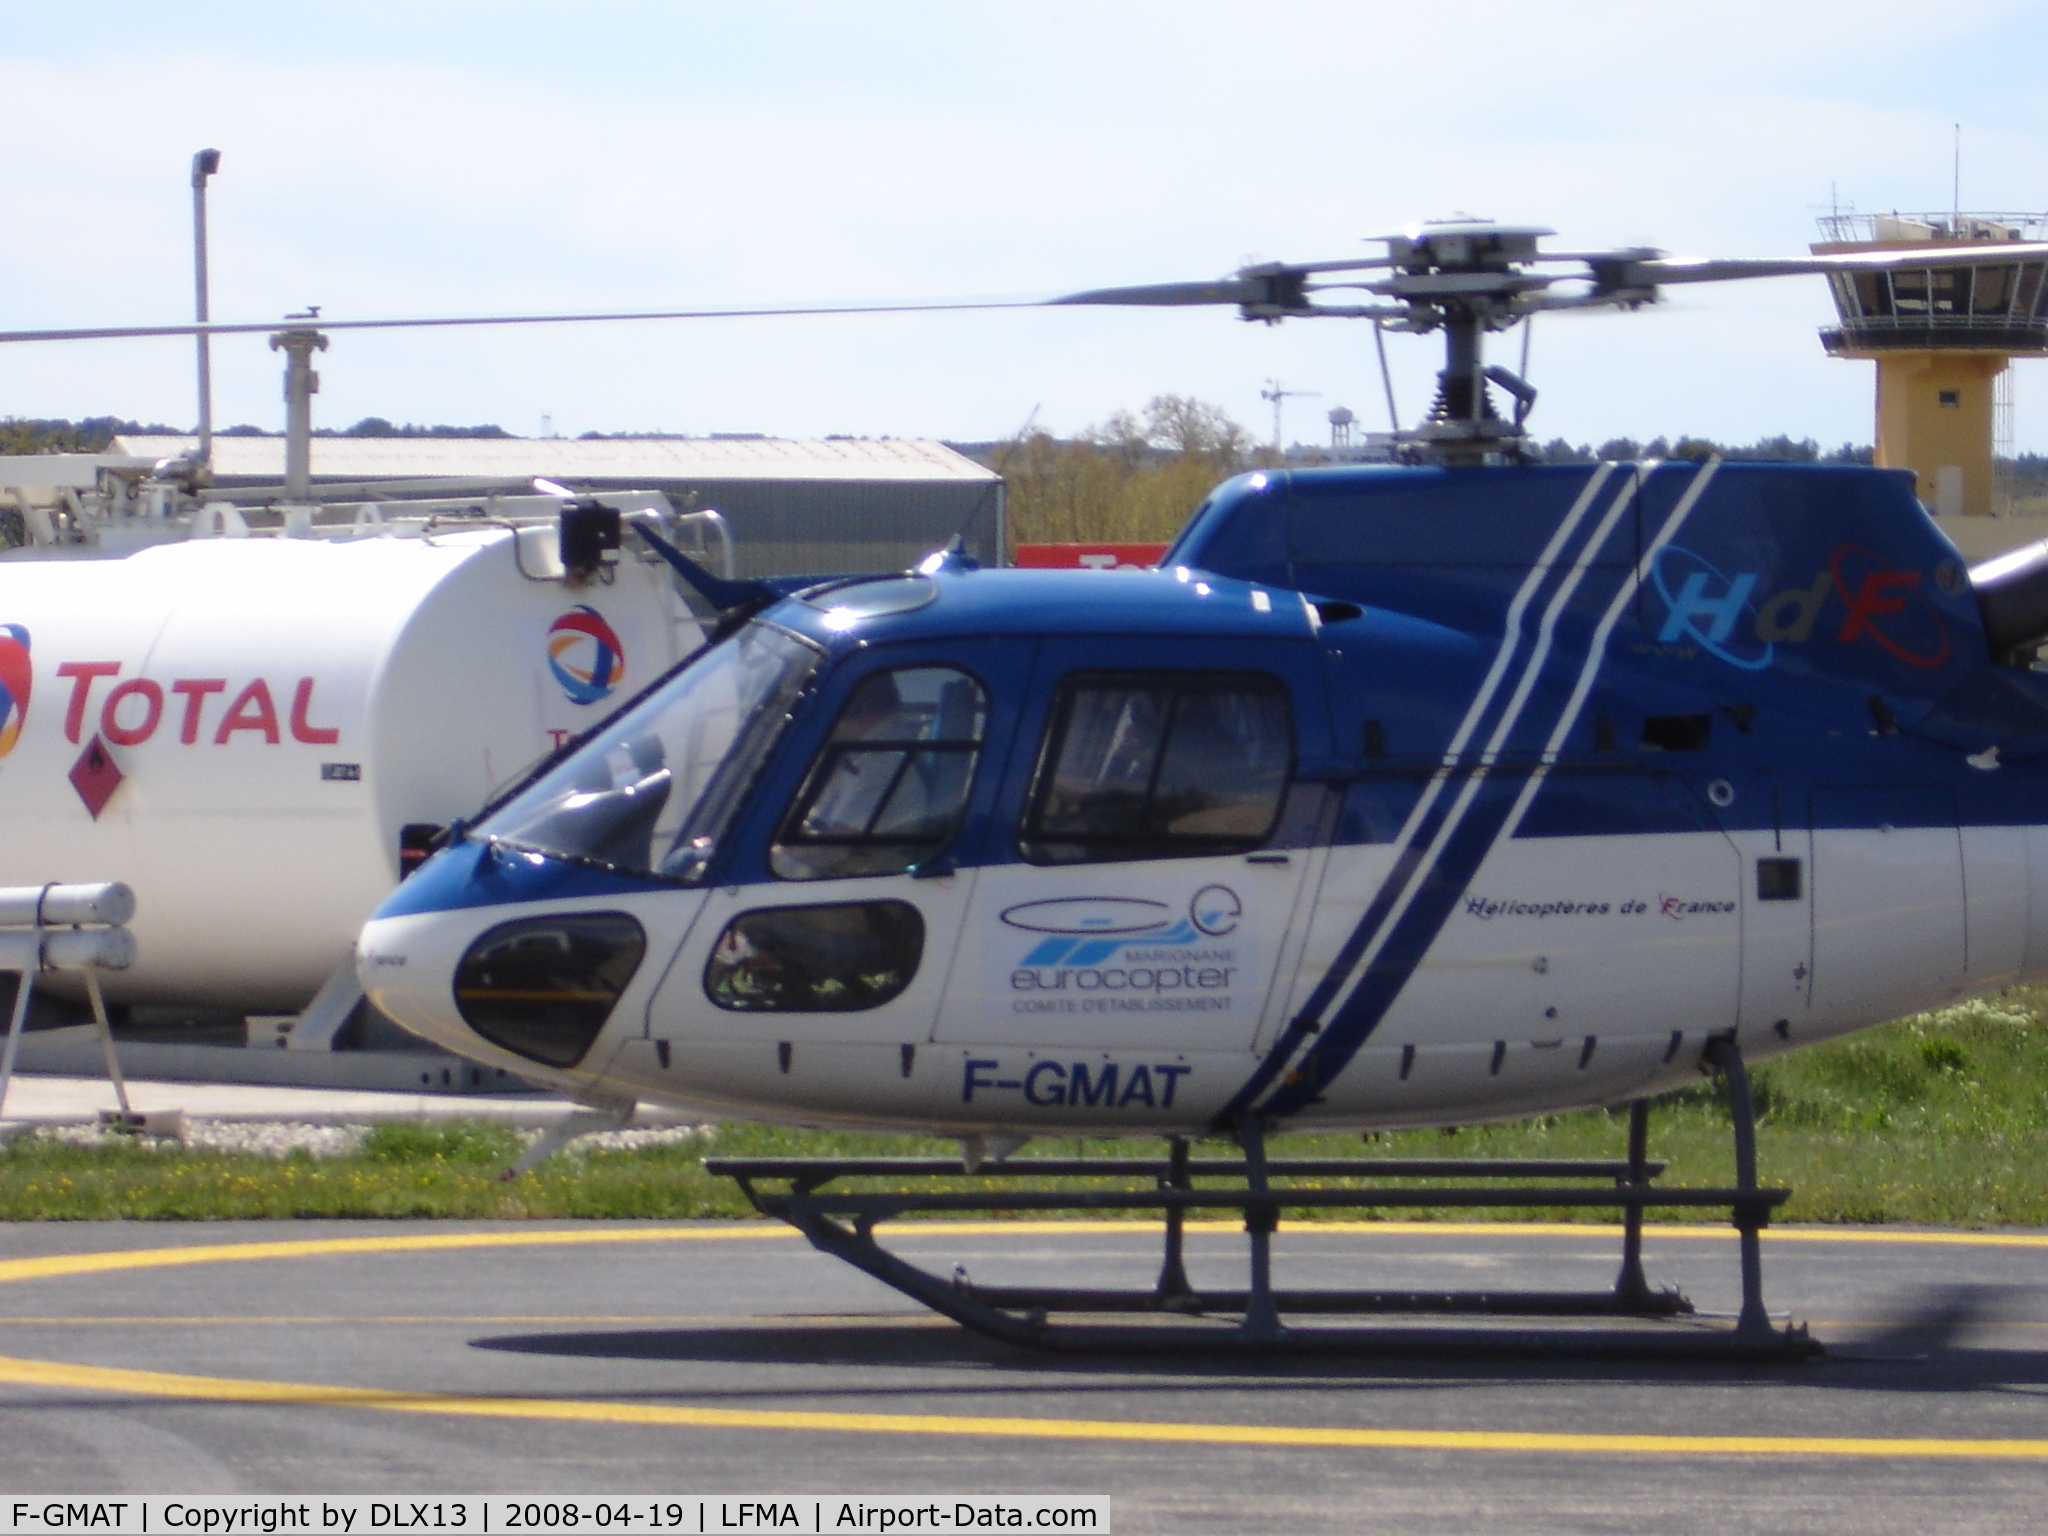 F-GMAT, Eurocopter AS-350B-3 Ecureuil Ecureuil C/N 3202, owned by 'Helicopteres De France'